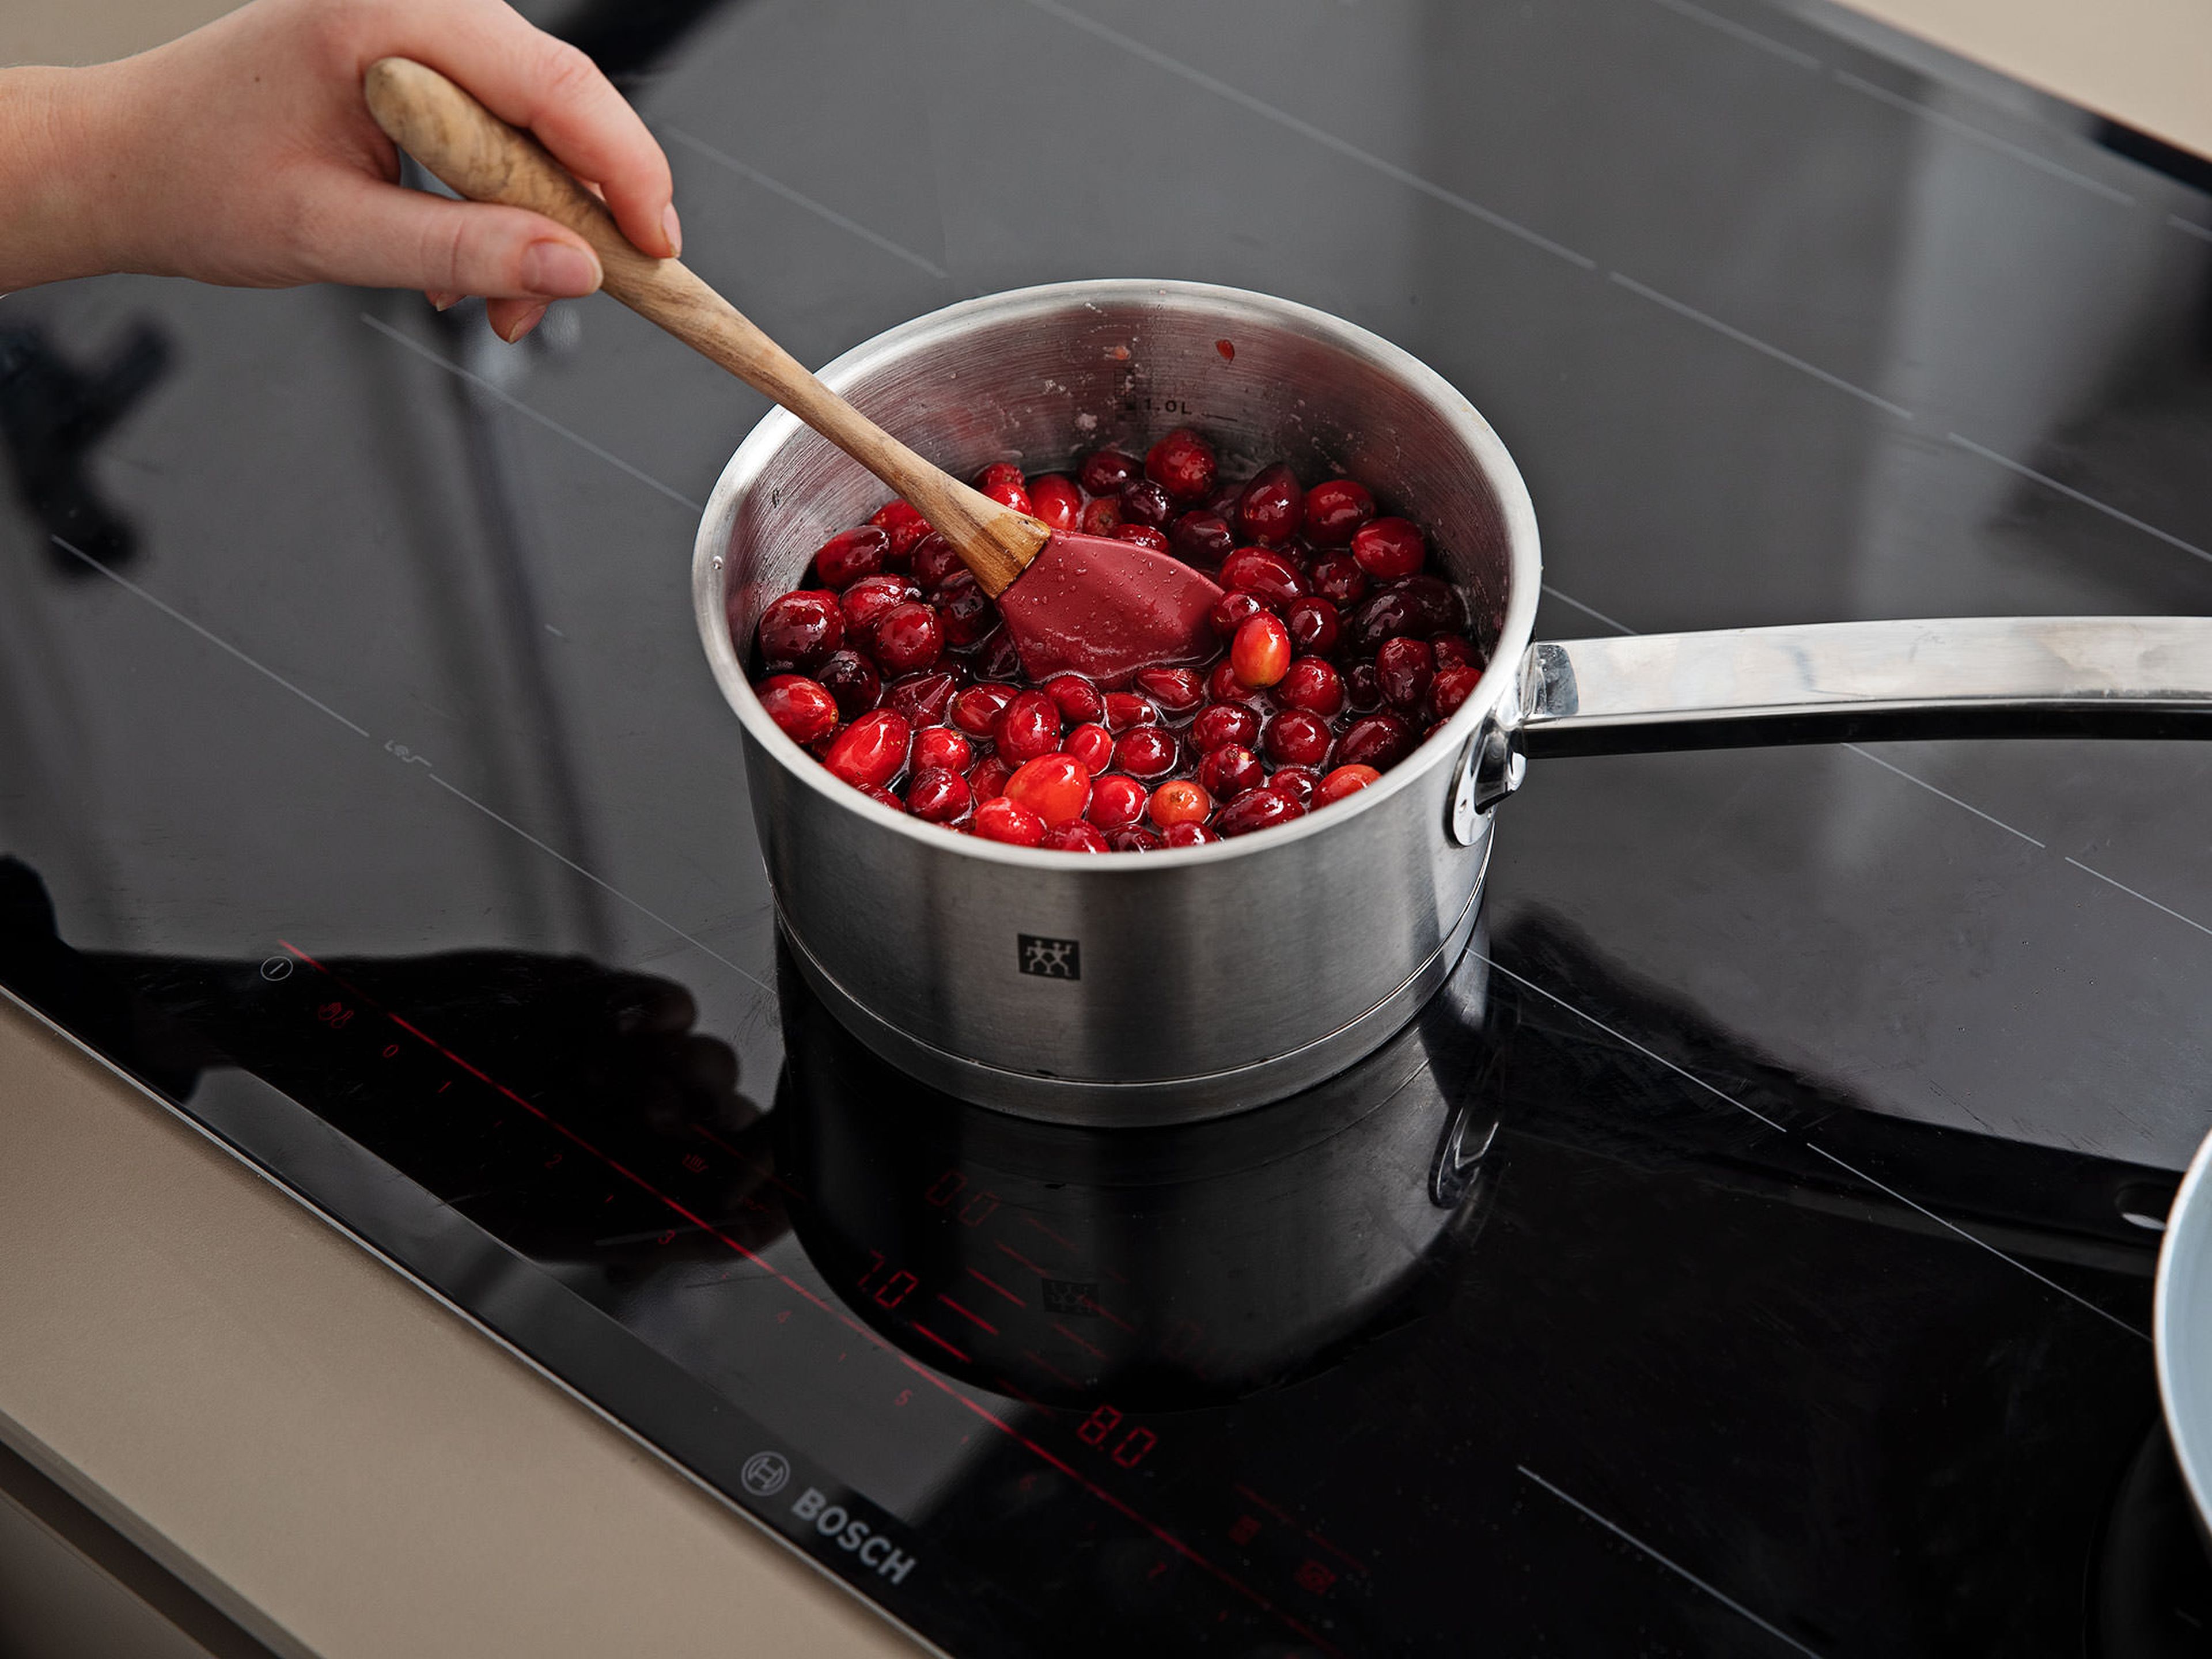 Preheat the oven to 220°C/428°F. To make the cranberry jam, halve vanilla bean and scrape into a saucepan. Add cranberries, another part of the sugar, vanilla pudding powder, starch, and remaining water. Bring to a boil, then reduce heat, and simmer for approx. 20 min., or until thick. Set aside to cool, then puree with an immersion blender until smooth.